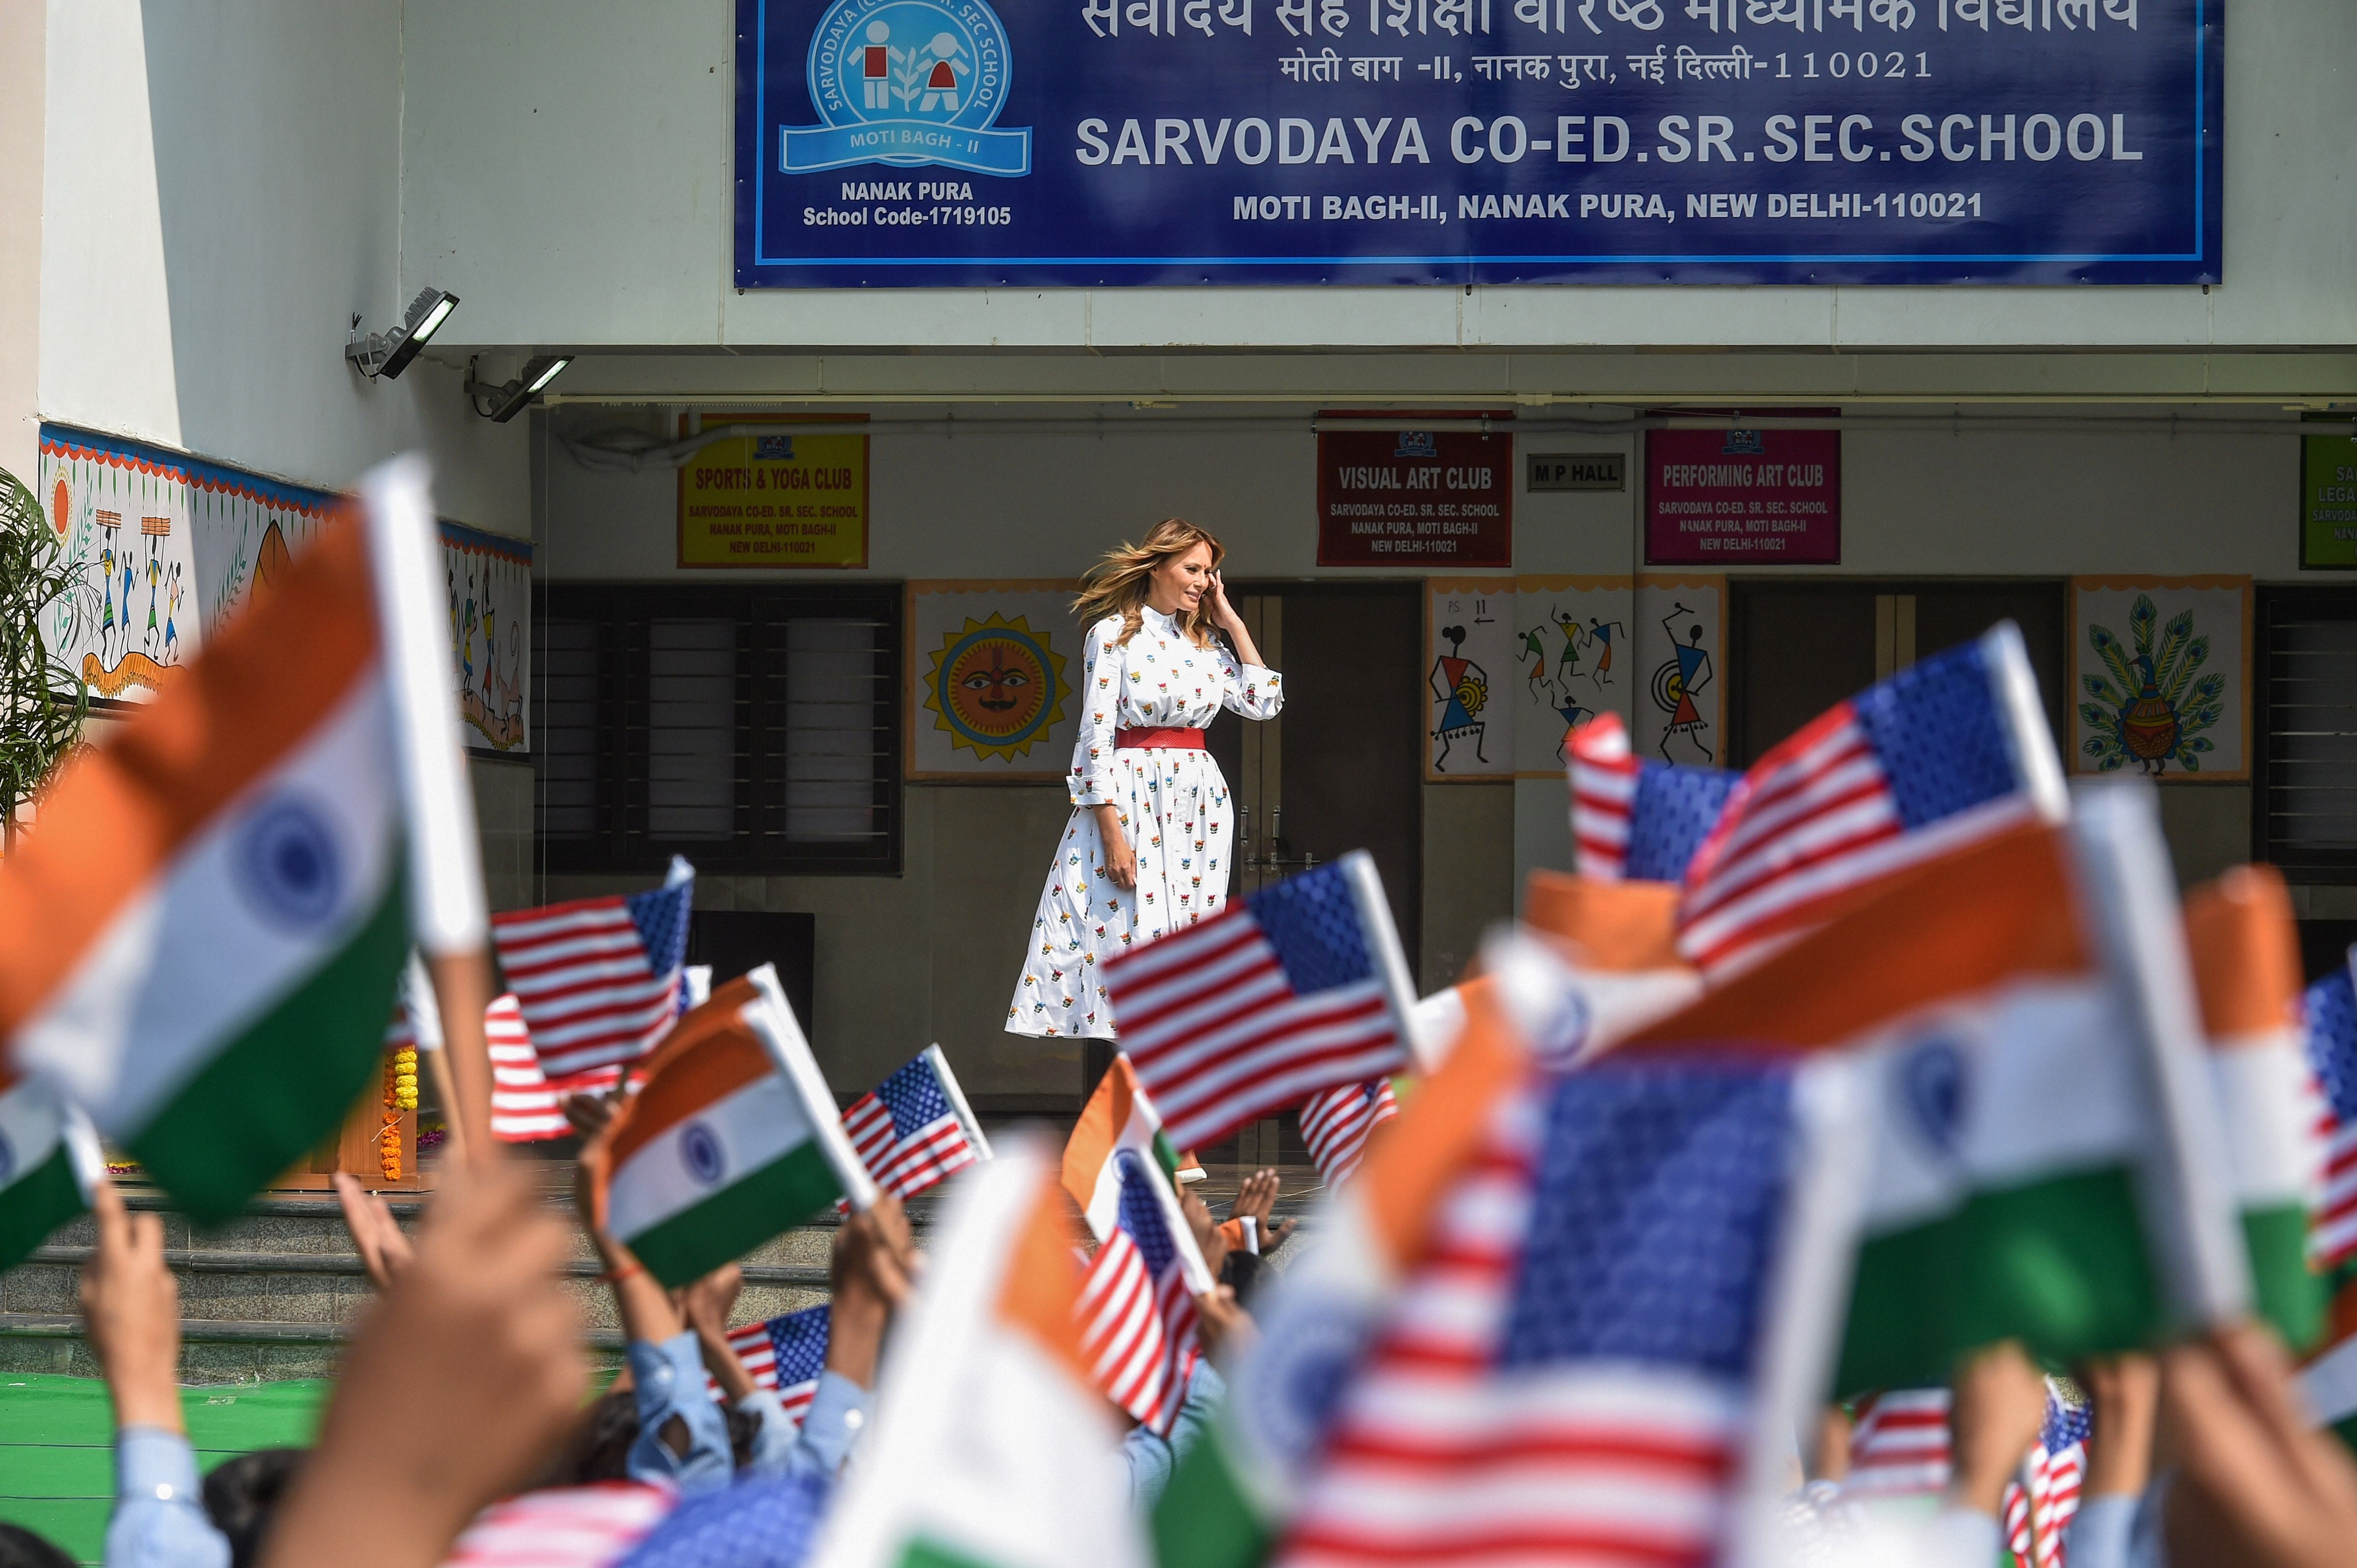 US First Lady Melania Trump during her visit to a government school in New Delhi. (PTI Photo)